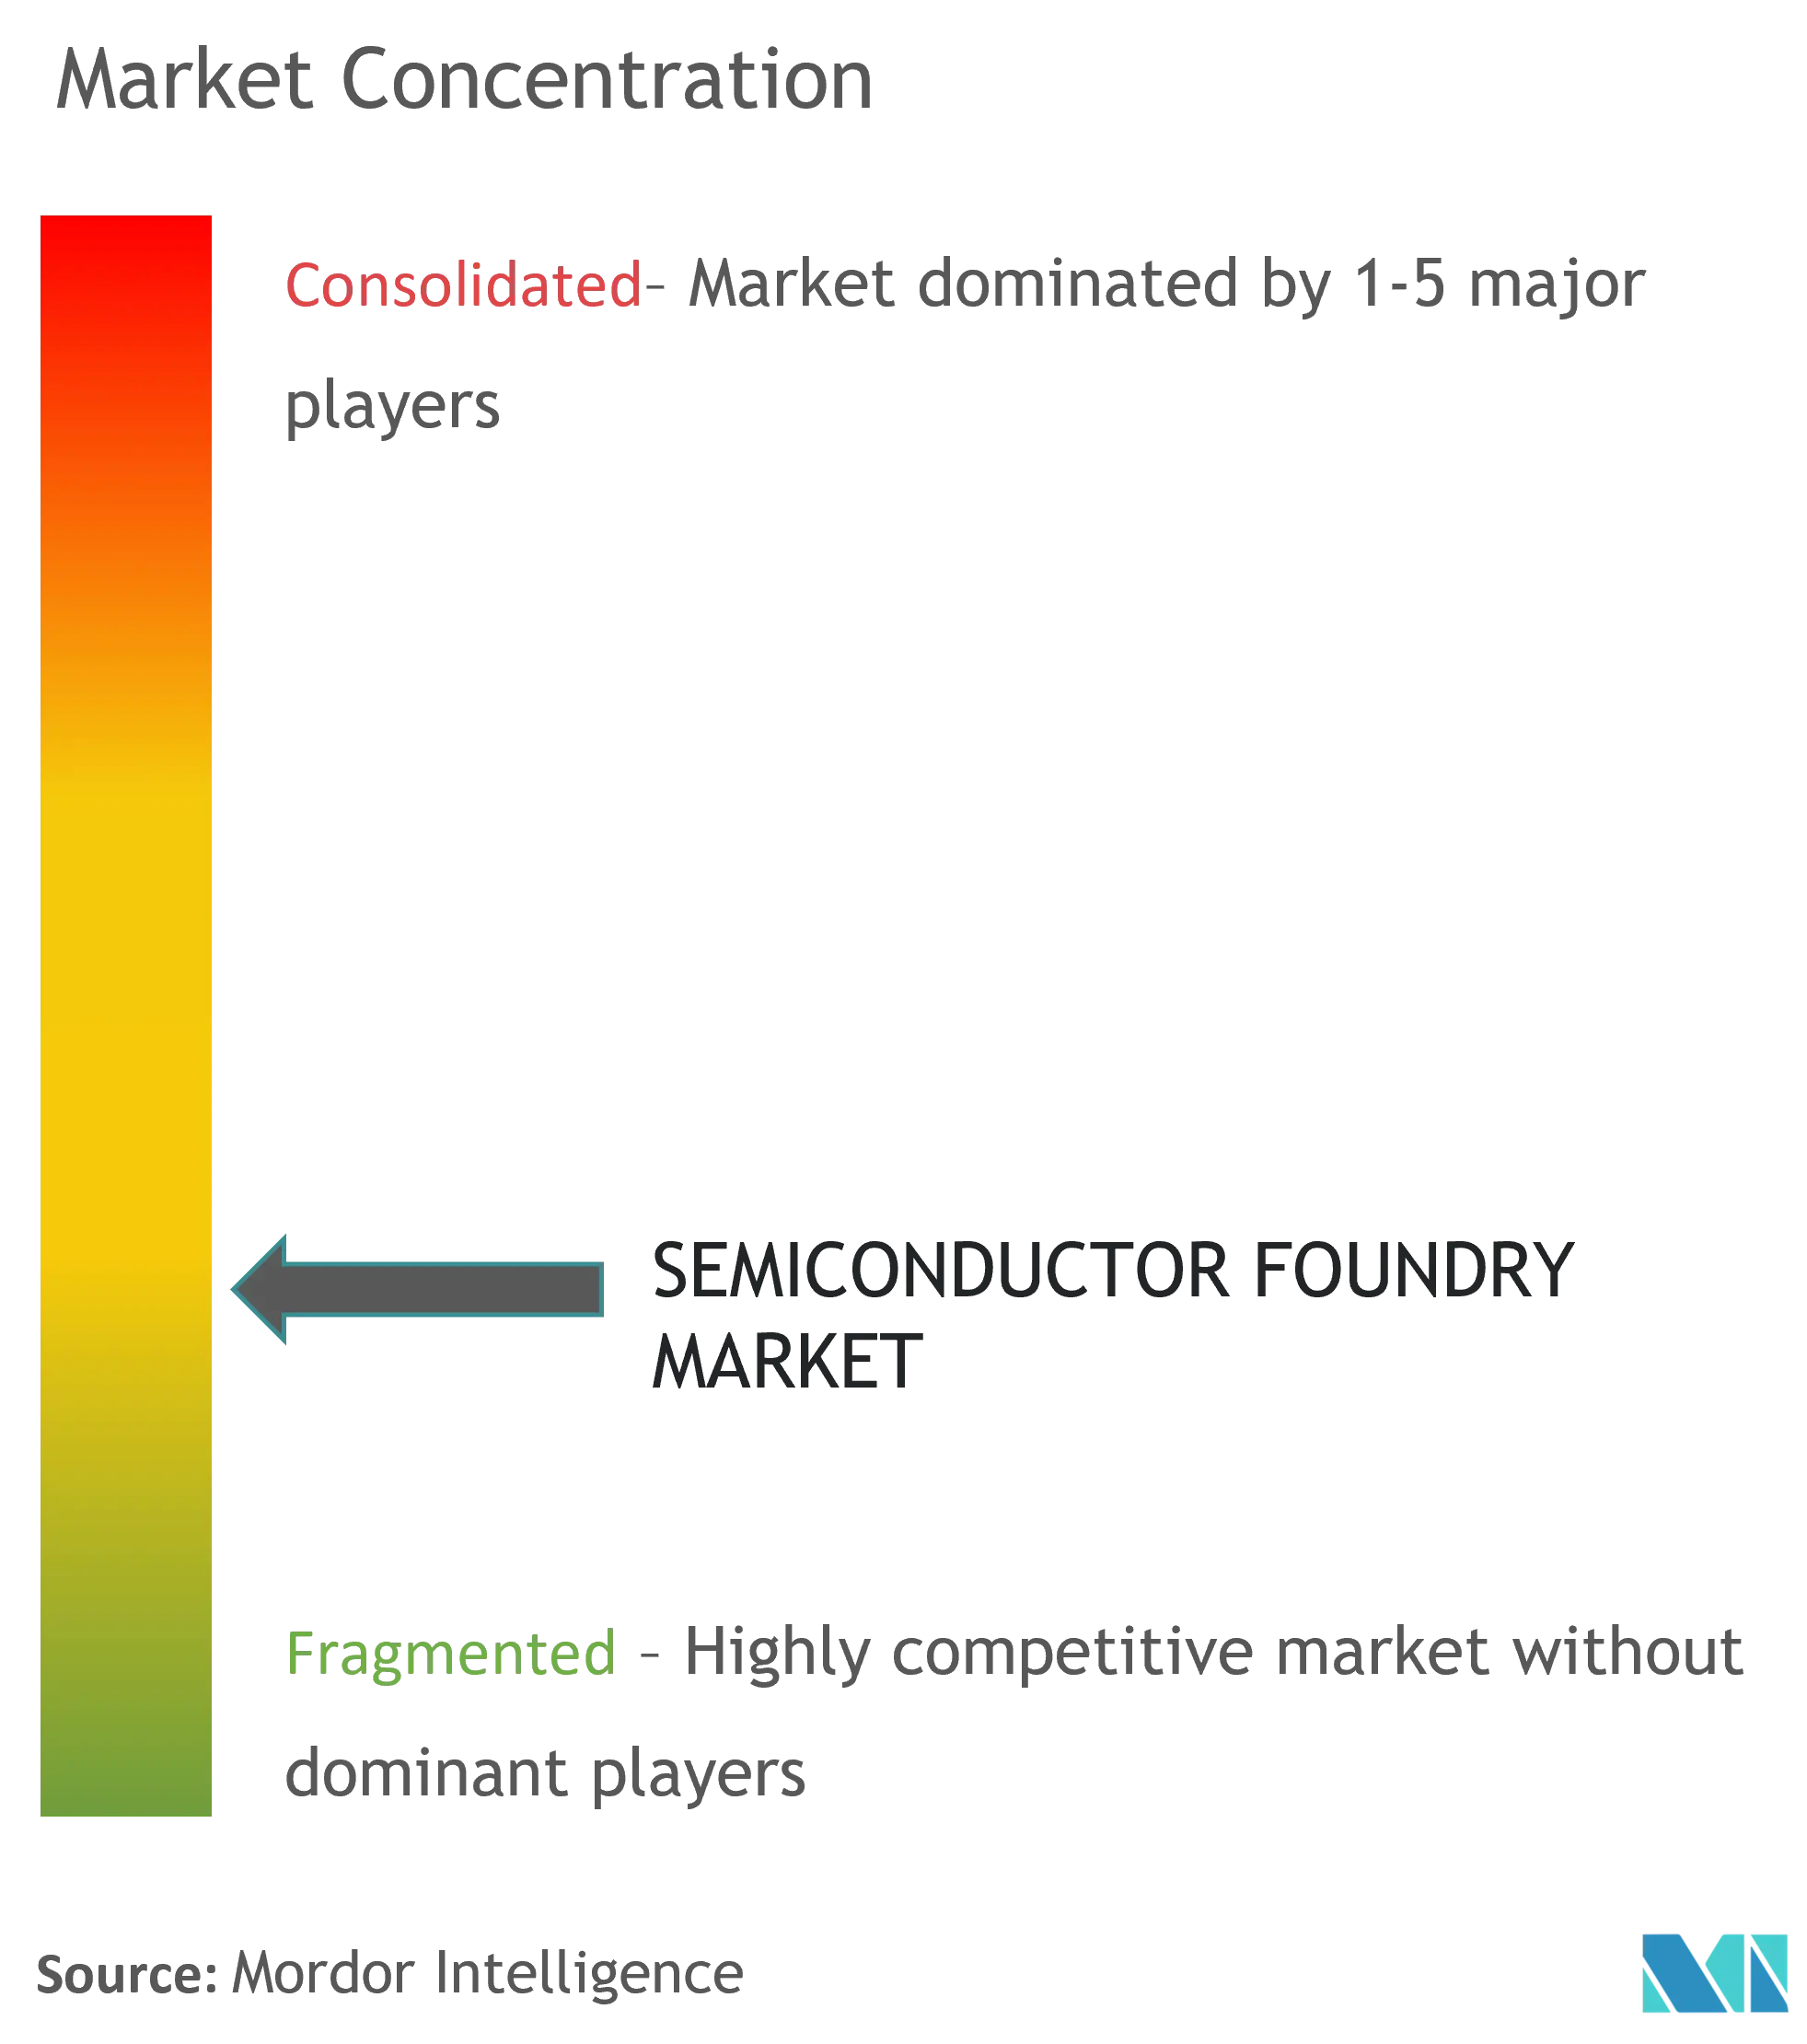 Semiconductor Foundry Market Concentration